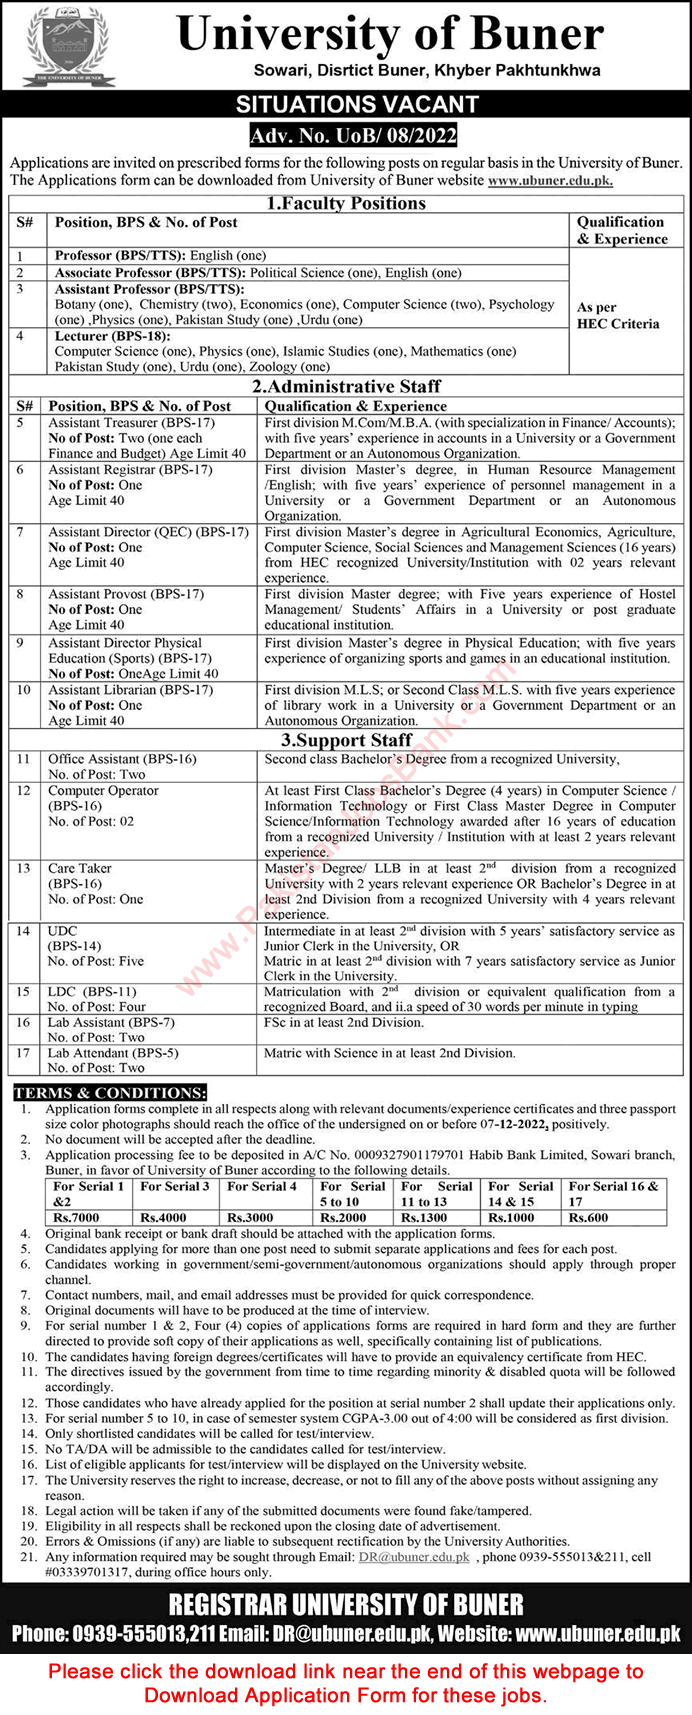 University of Buner Jobs November 2022 Application Form Clerks, Teaching Faculty & Others Latest